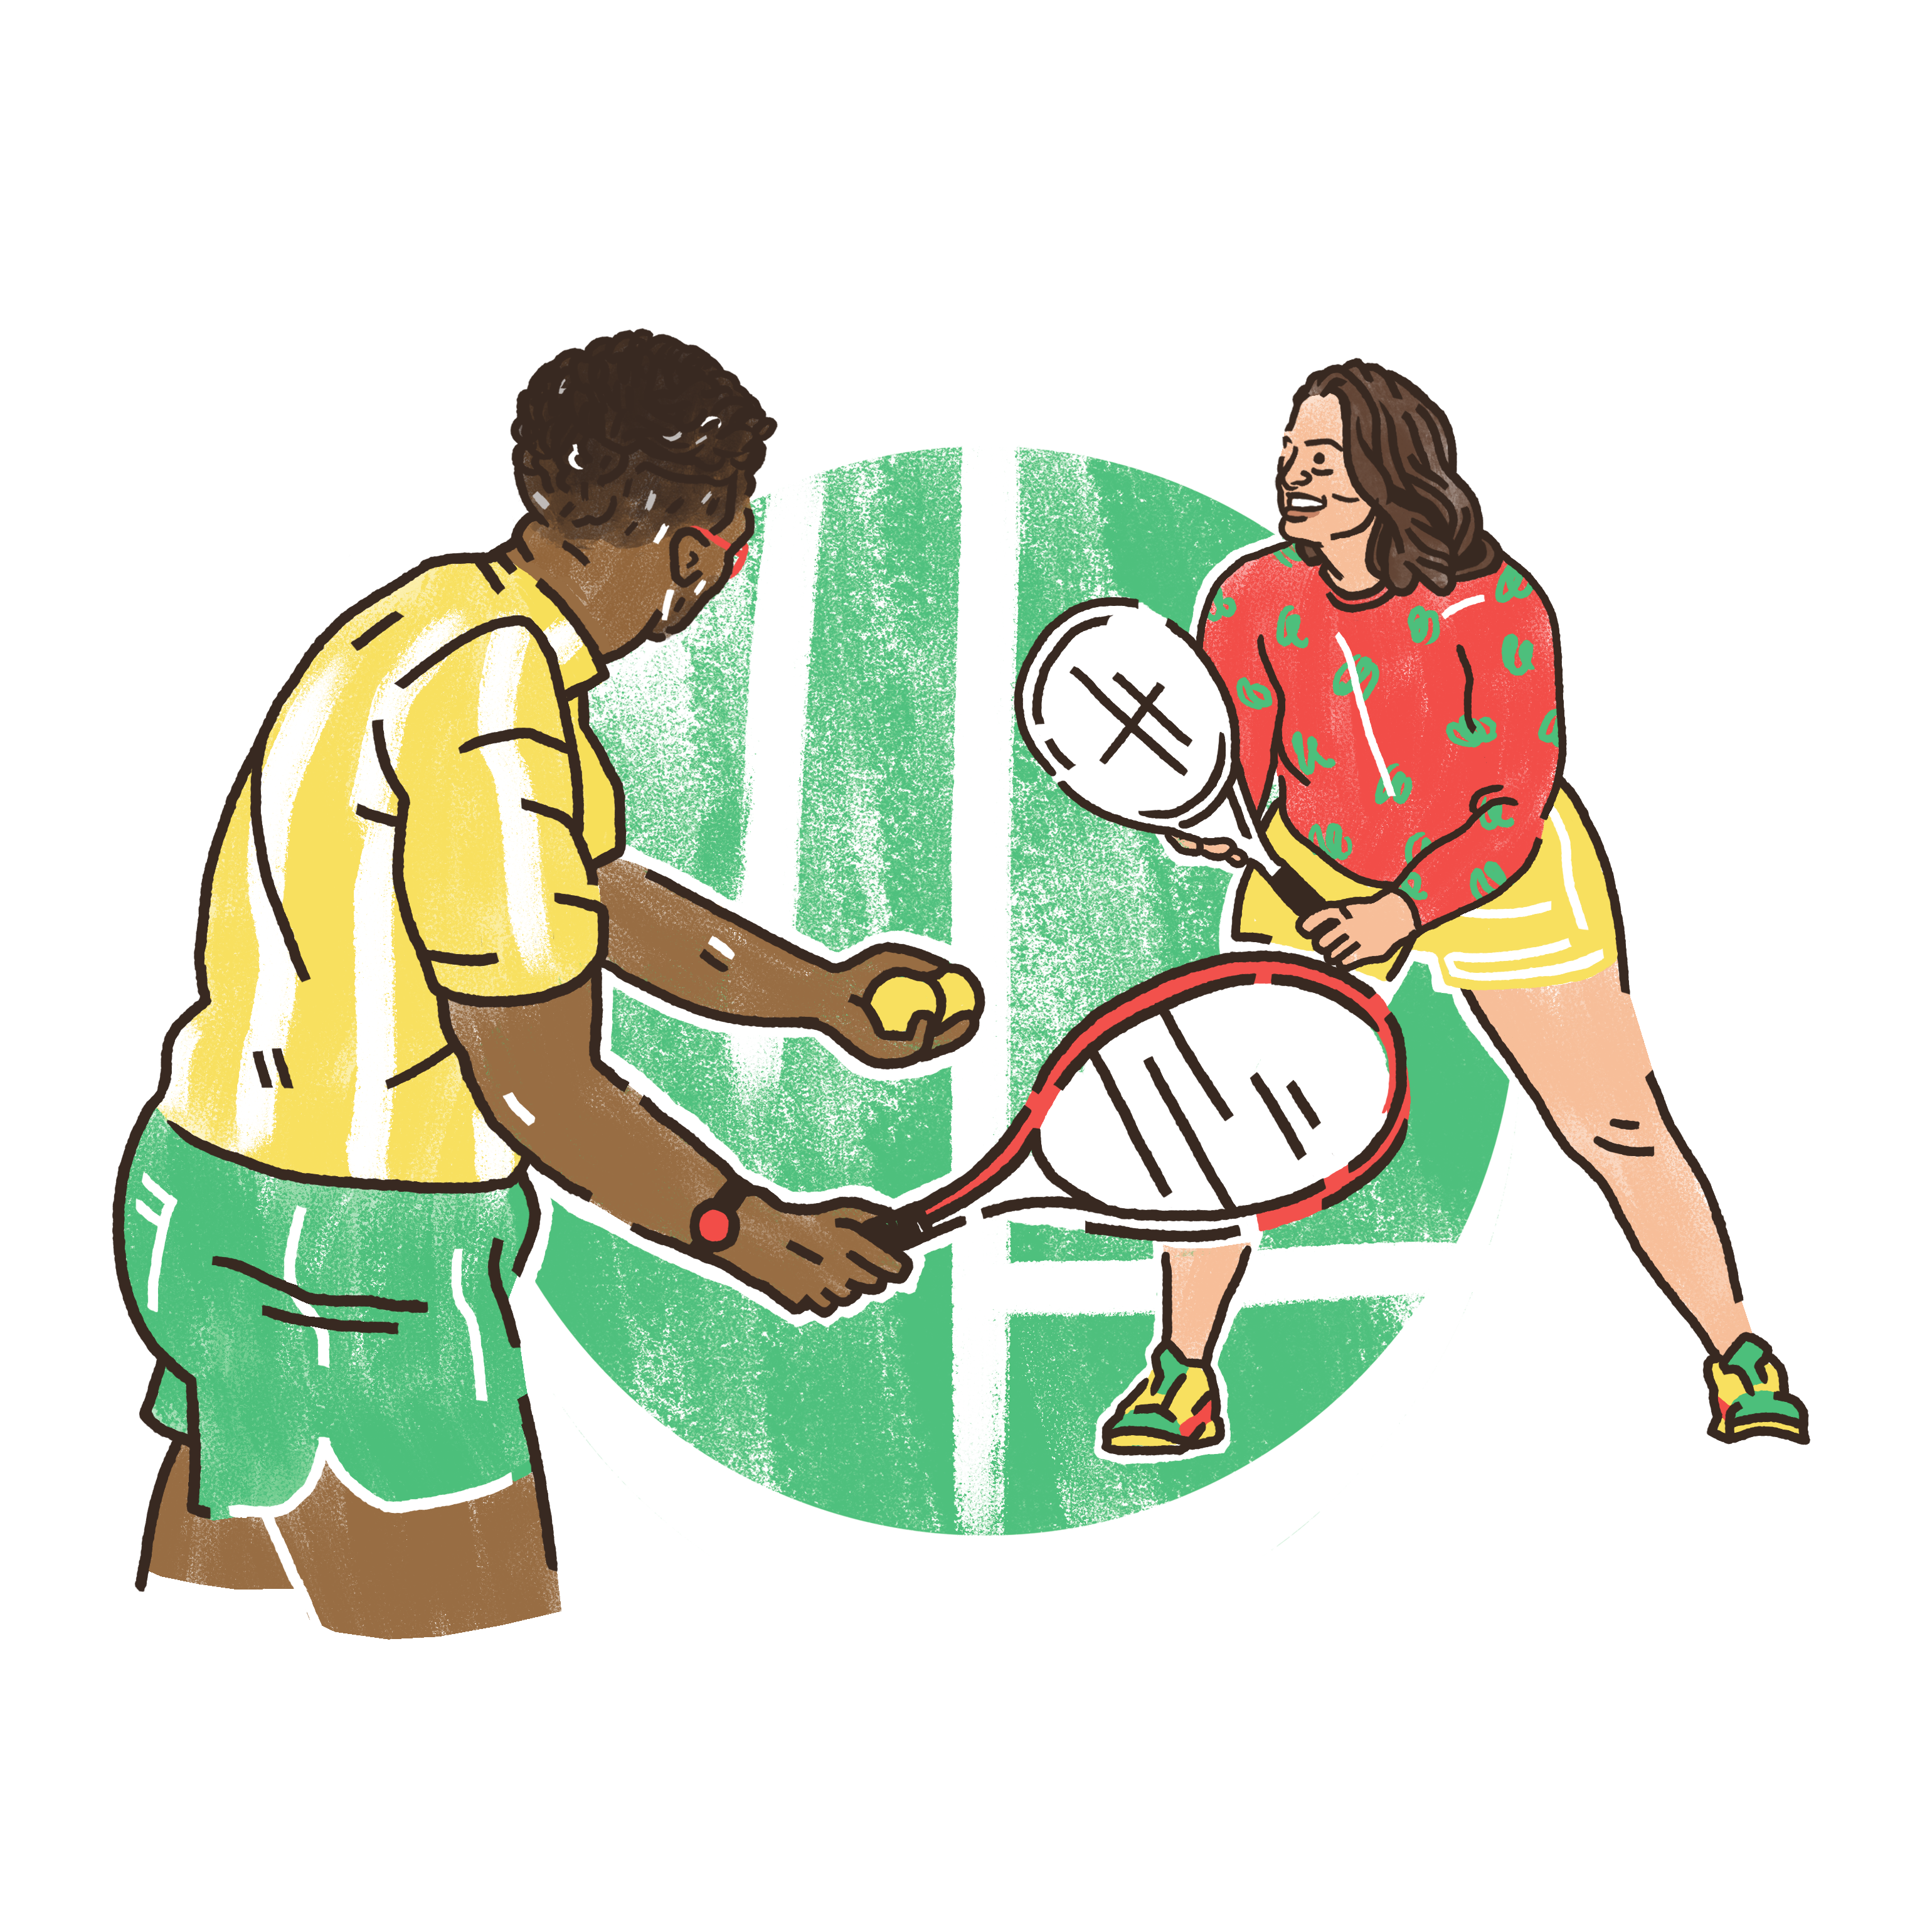 A man and woman playing tennis.